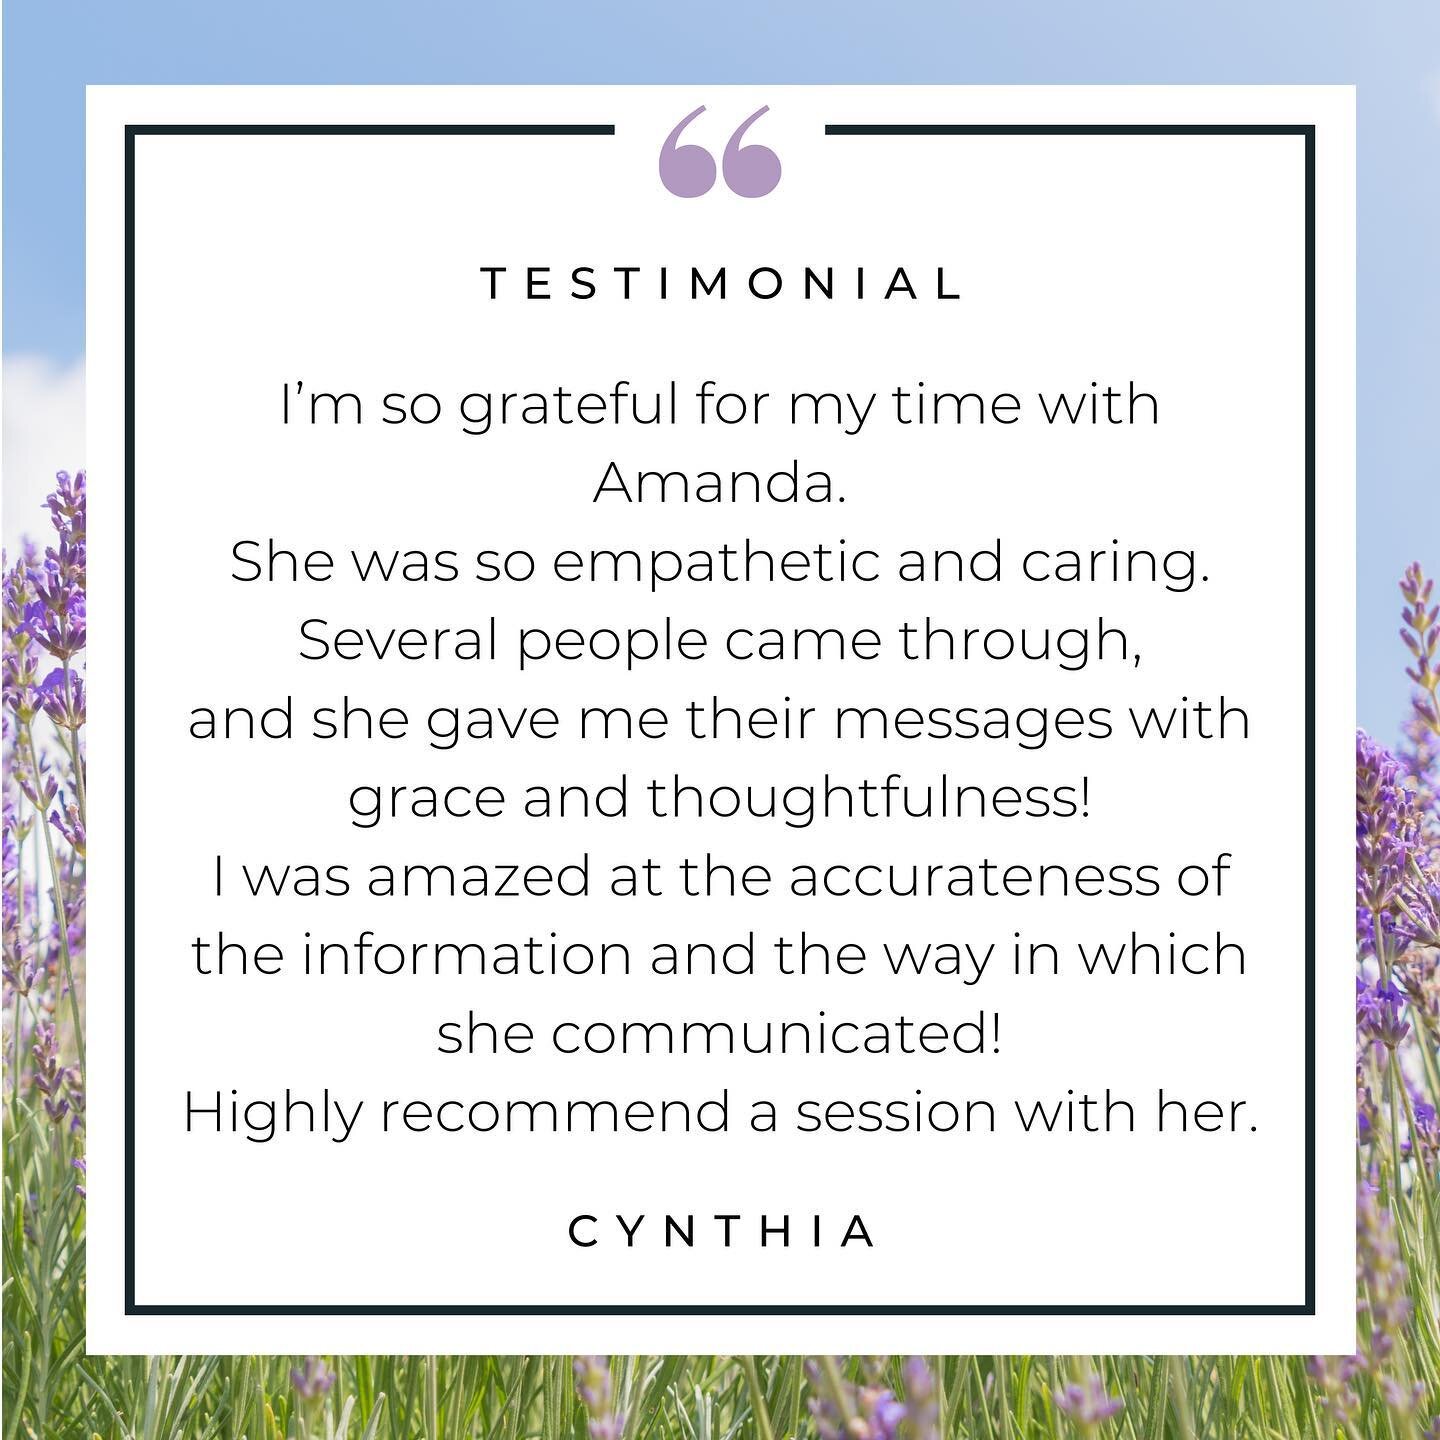 So grateful for opportunities to offer mediumship readings and help people connect with their loved ones who&rsquo;ve passed. Thank you, Cynthia. 💜

#psychicmedium #medium #mediumship #mediumshipreadings #mediumreadings #readings #newjersey #nj #gle